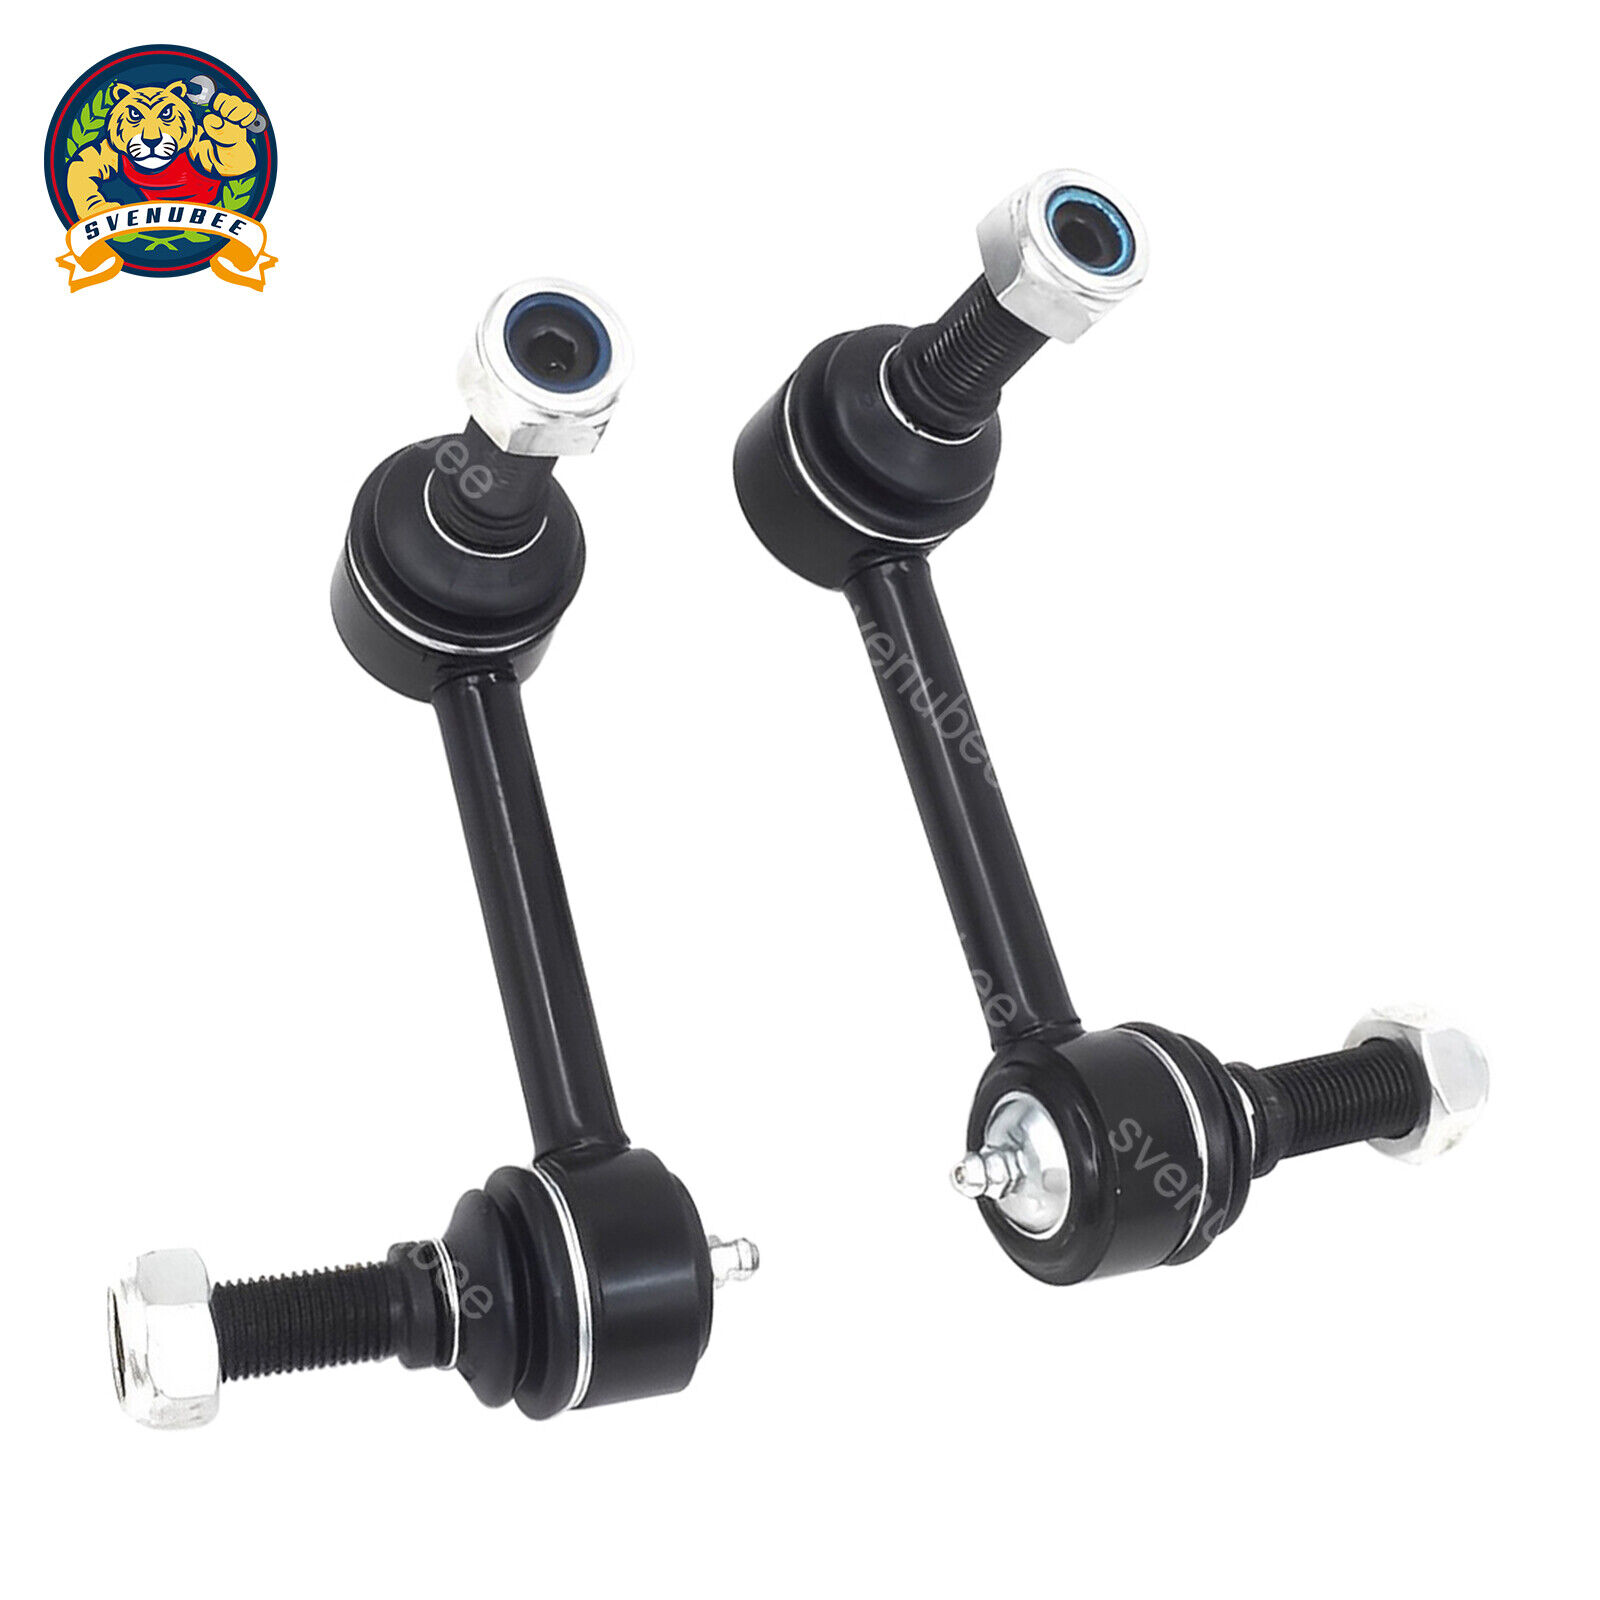 2 Front Sway Bar End Links For 2004 2005 2006 2007 Chevy Trailblazer GMC Envoy